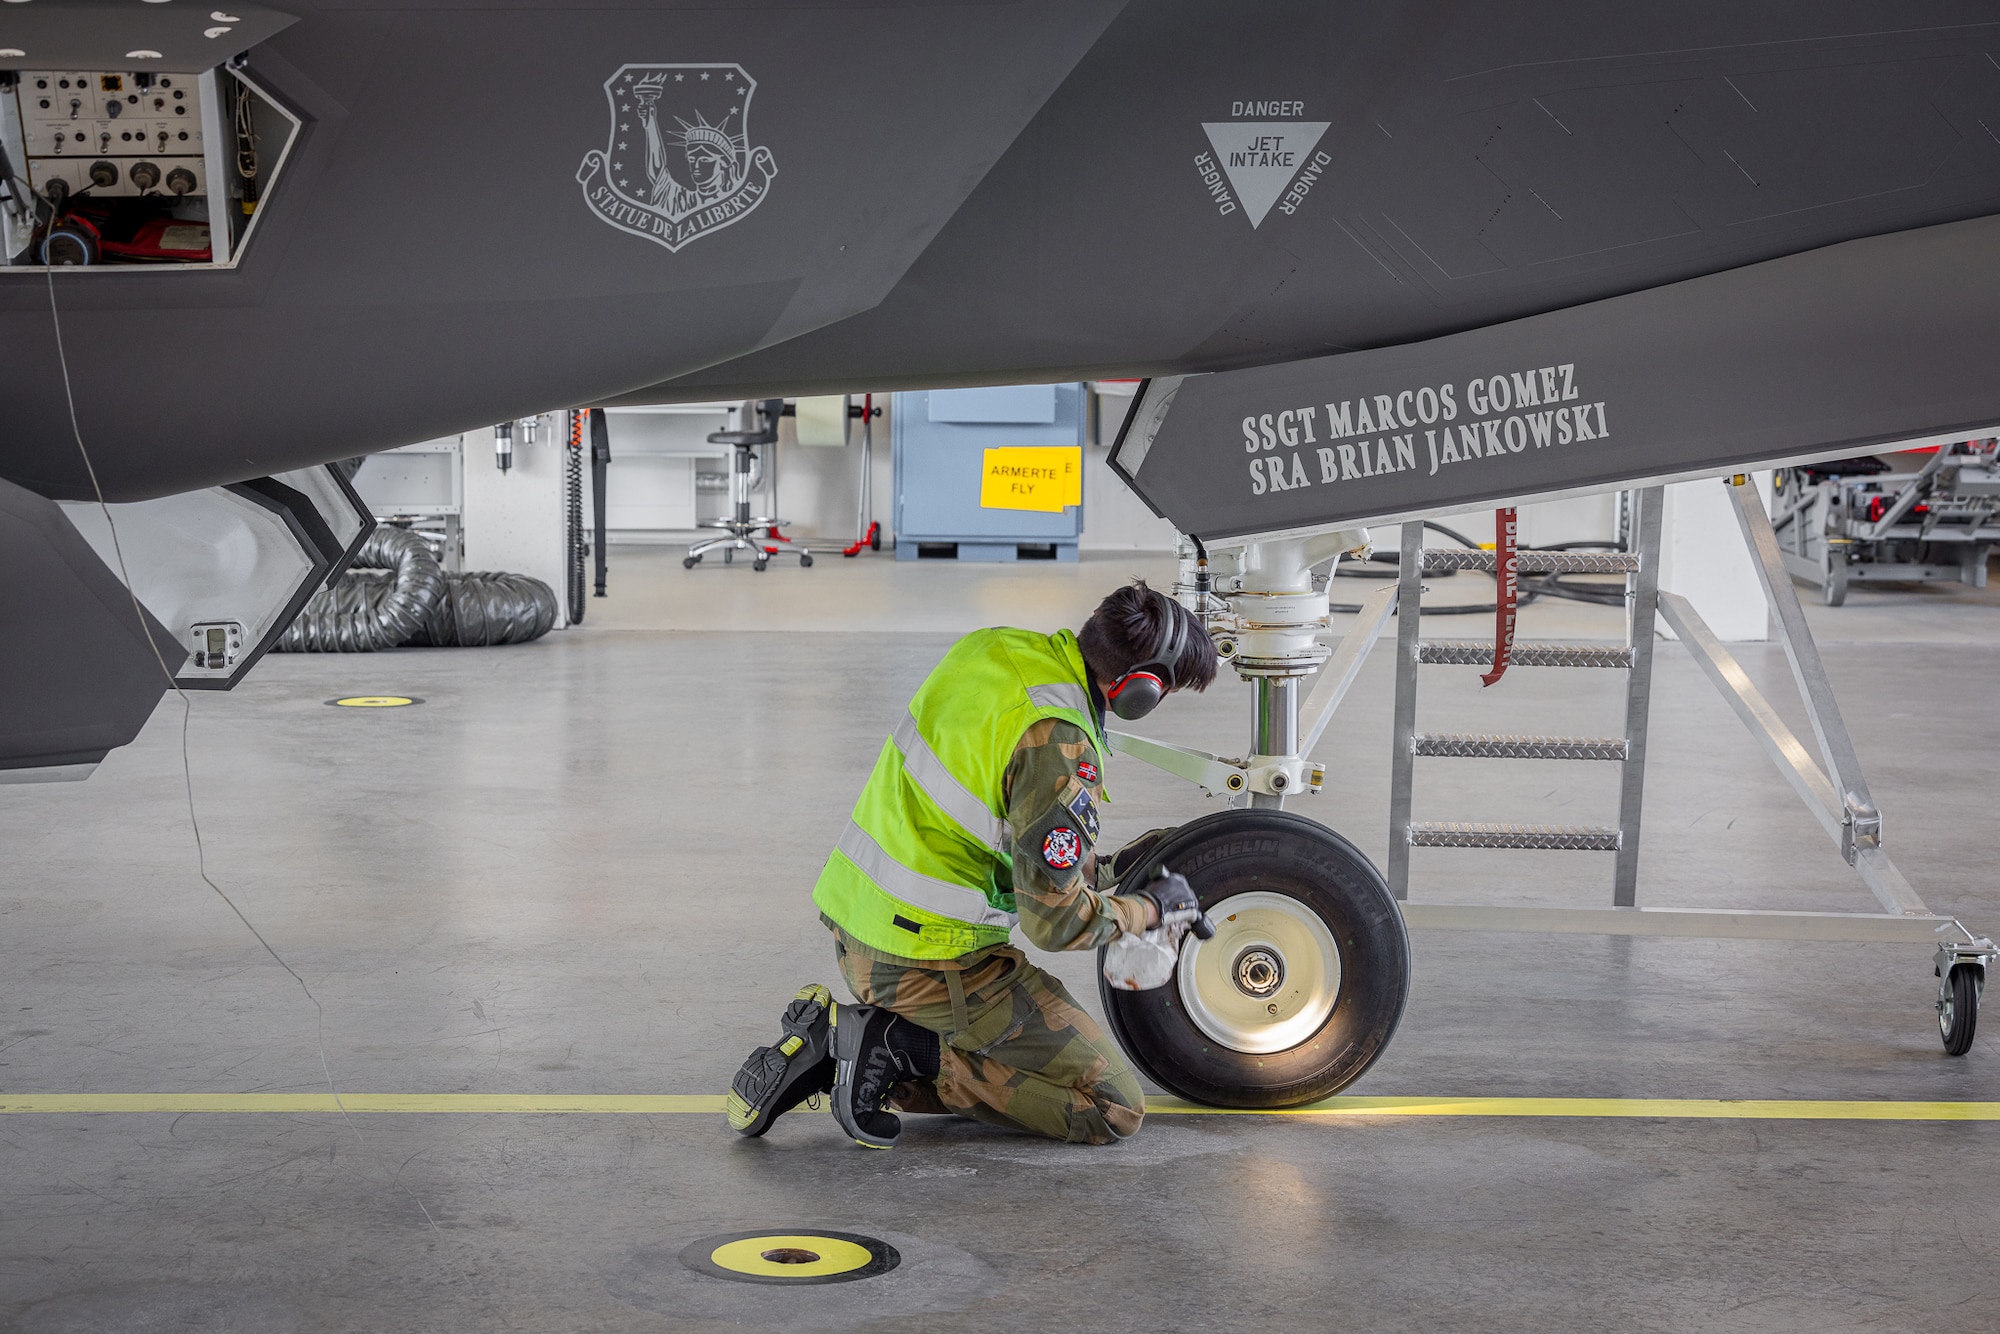 An Airman with the Royal Norwegian Air Force conducts maintenance on a U.S. F-35 Lightning II at Ørland Air Station in Norway, April 8, 2024. The mission marked the first time that Airmen from one nation’s military provided servicing to another nation’s F-35 aircraft without supervision. The cross servicing of aircraft between NATO partners highlights the future interoperability with fellow F-35 users across the European Theater. (RNoAF photo by Ole Andreas Vekve)